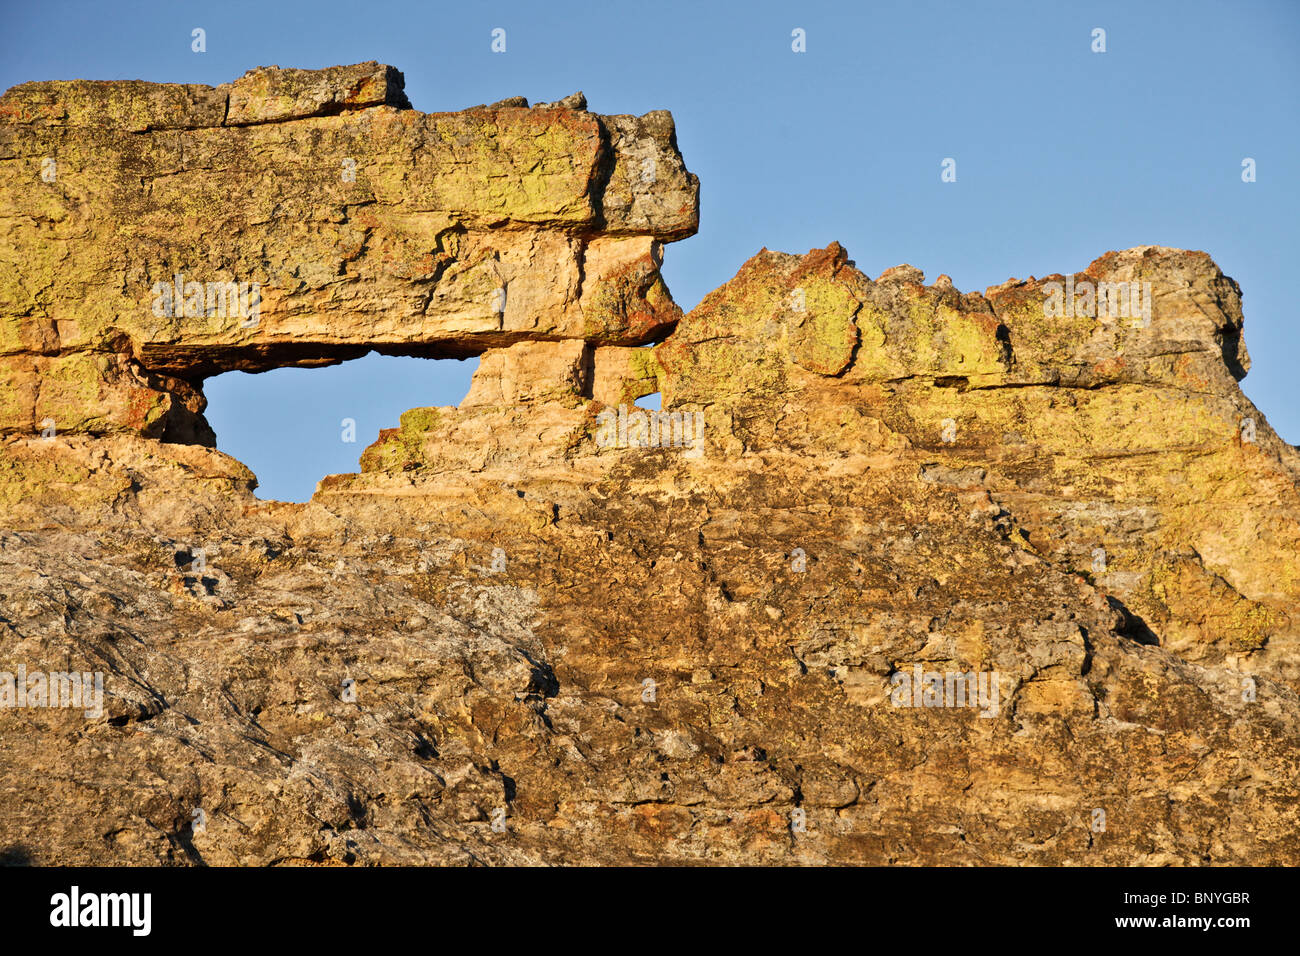 The Window of Isalo, a naturally eroded hole in sandstone rock, photographed at sunset. Isalo National Park, SW Madagascar Stock Photo